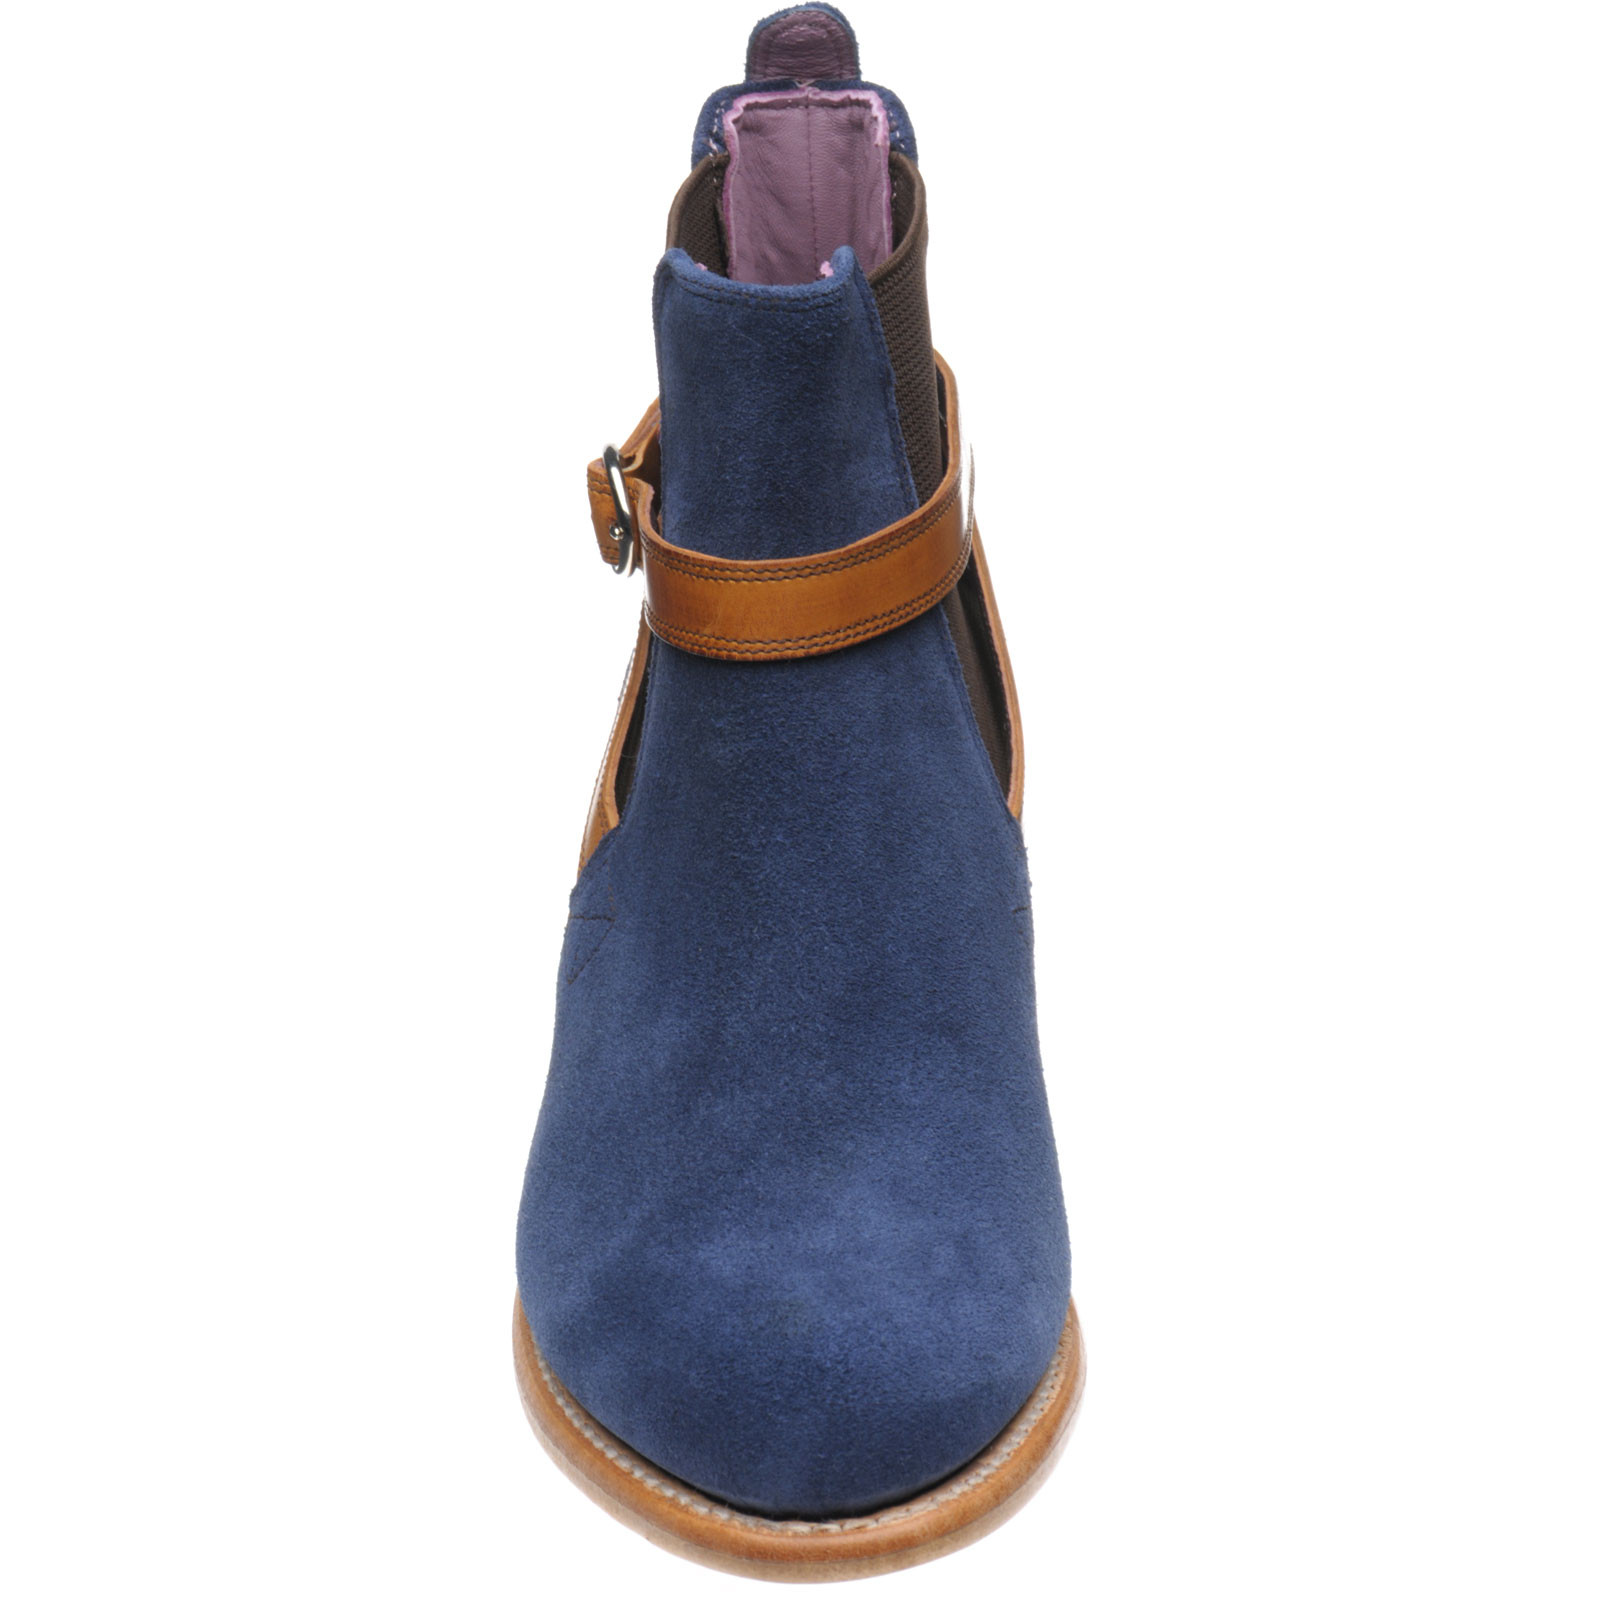 Barker shoes | Barker Sale | Alexandra ladies boots in Navy Suede and ...